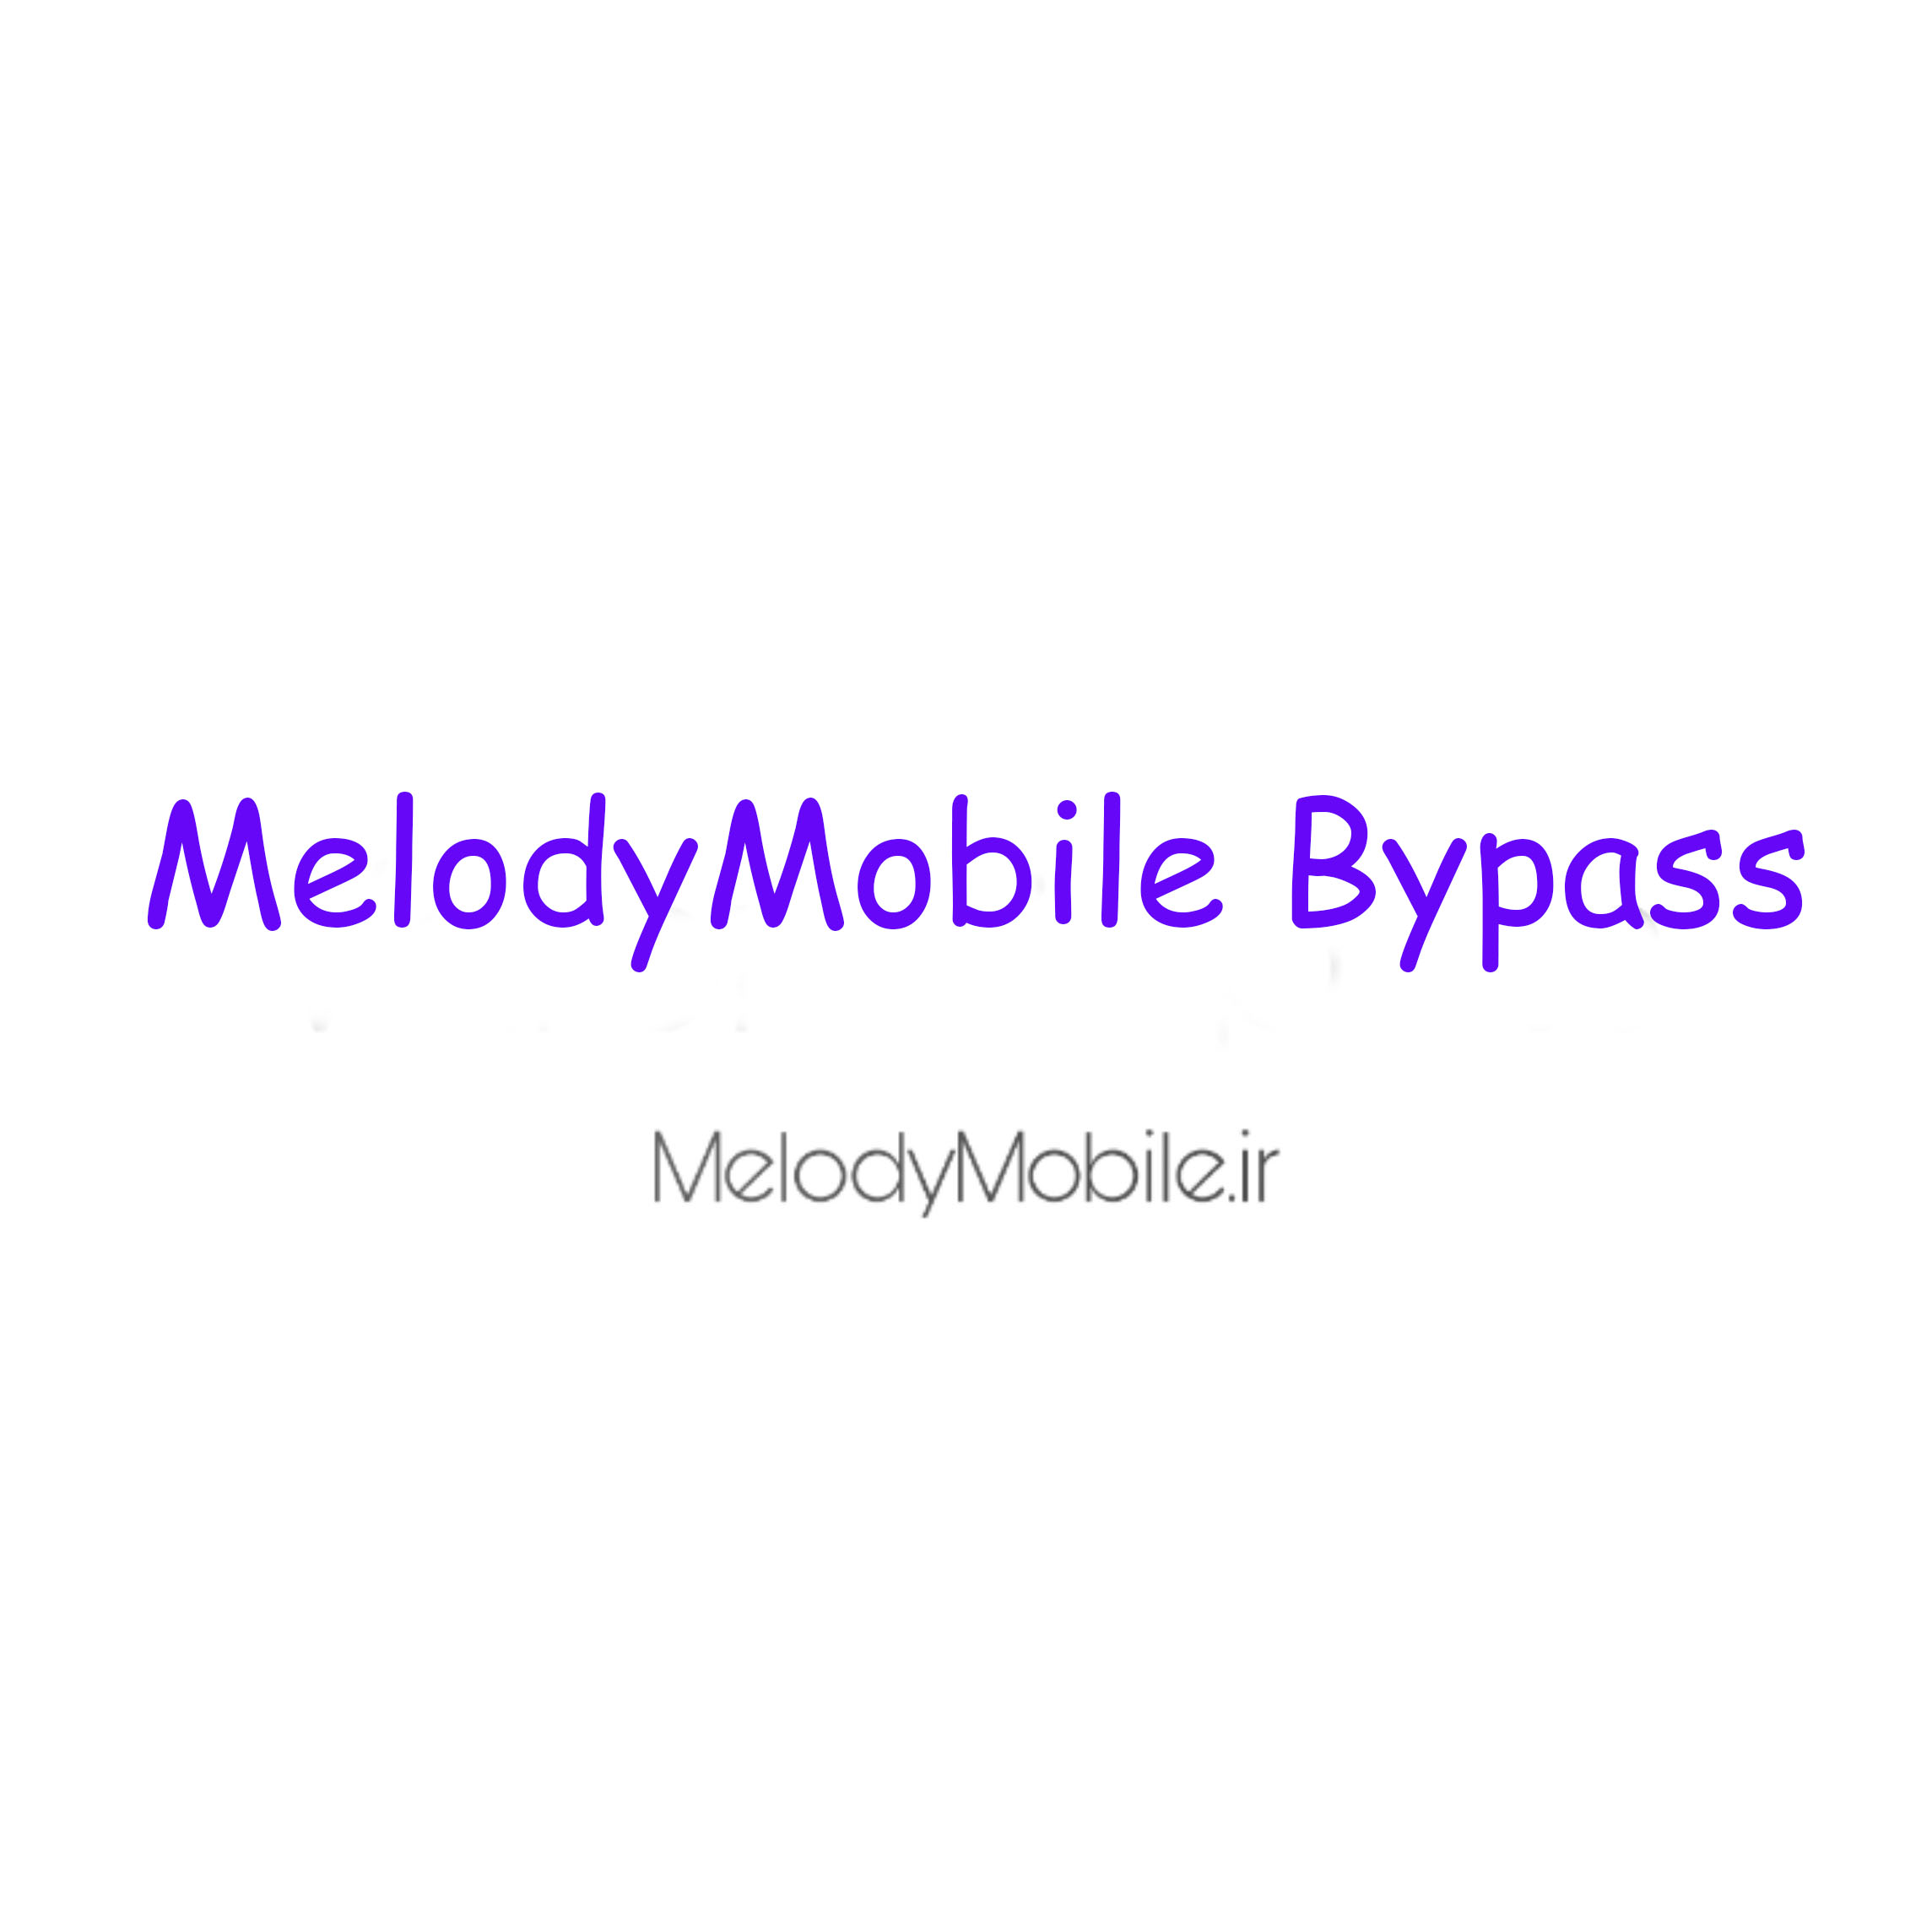 Melody Mobile Bypass